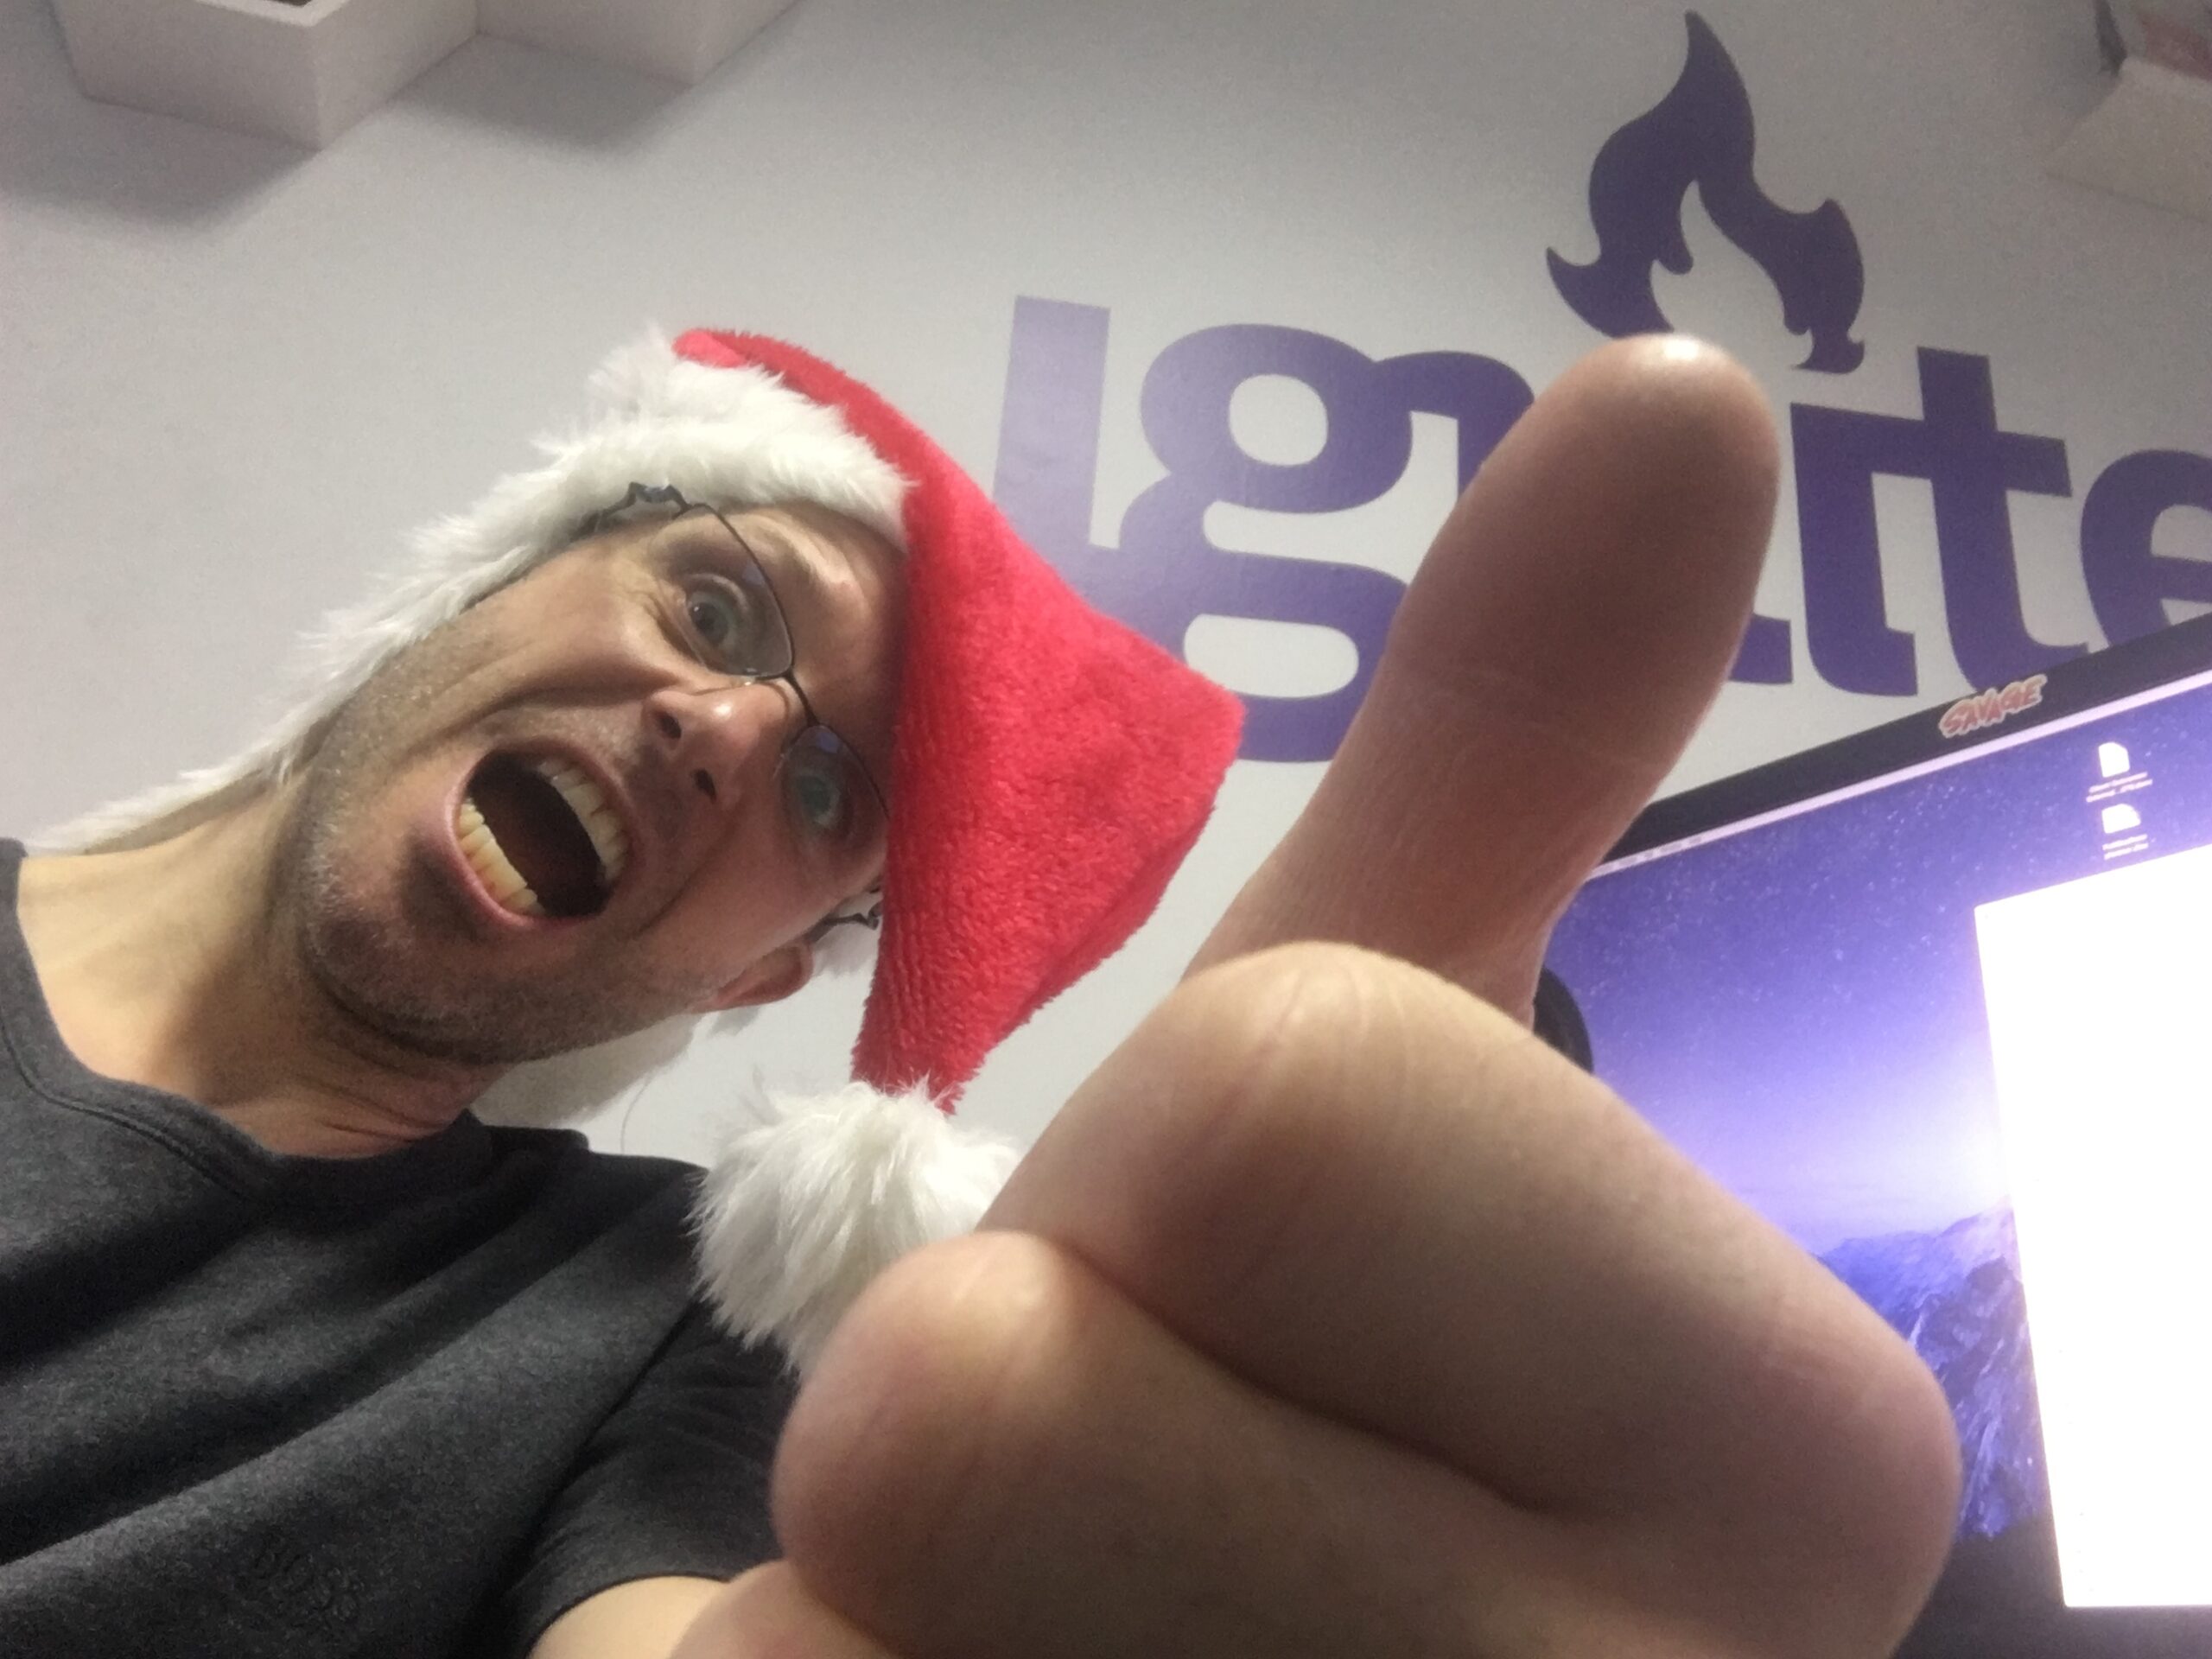 Nik Claus makes a seasonal appearance in the Spiral studio.